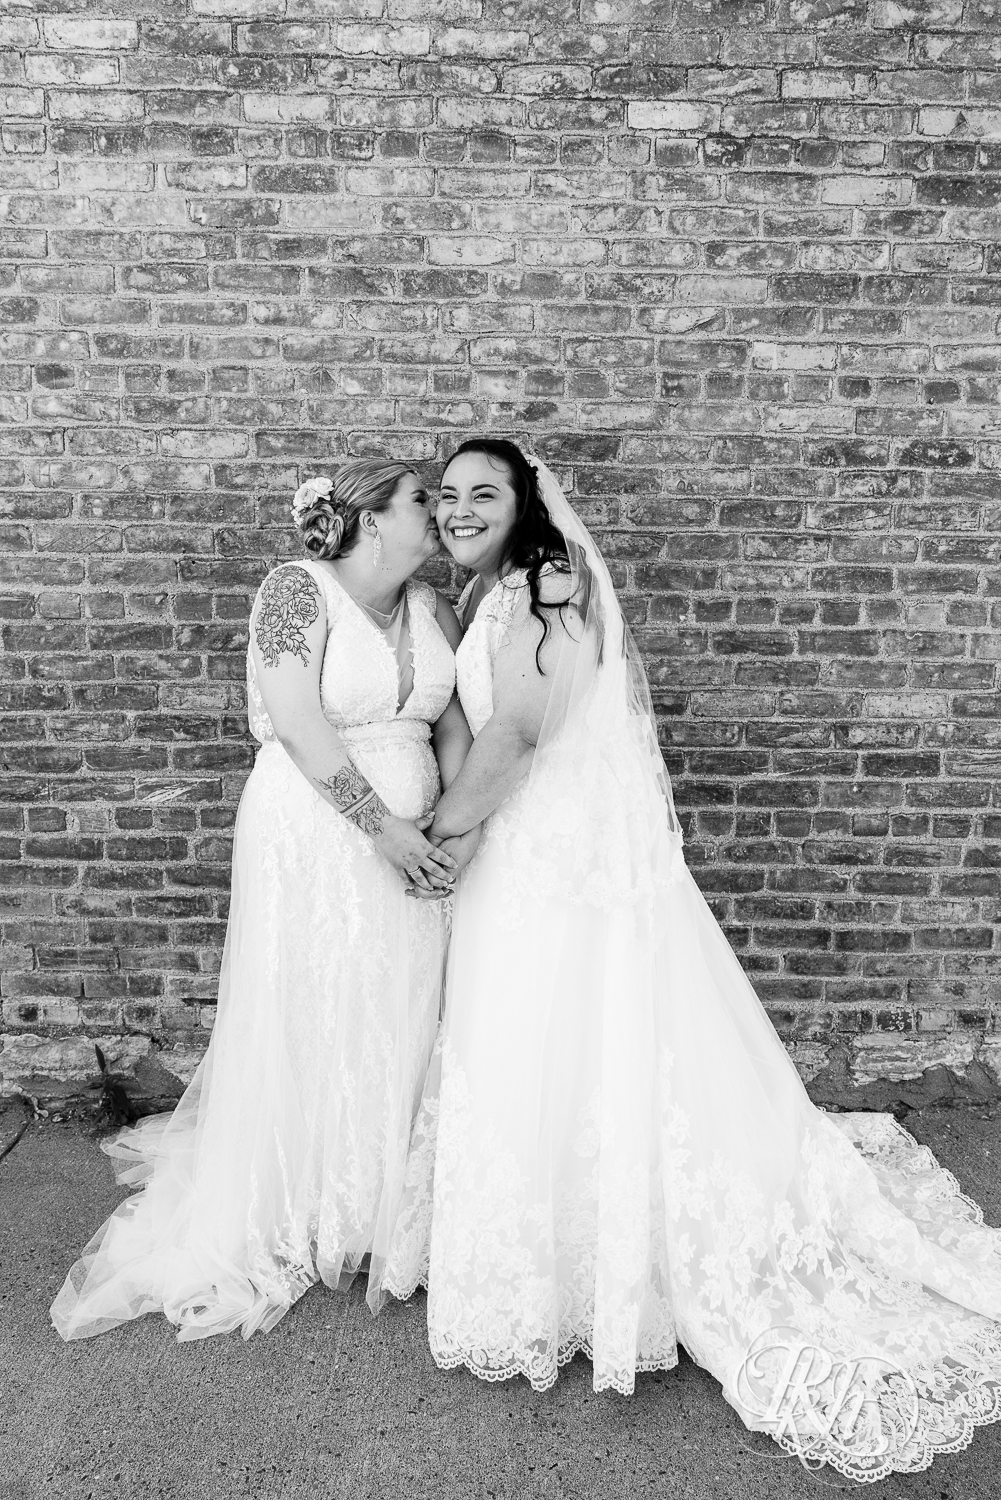 Lesbian brides smile during wedding day at Cannon River Winery in Cannon Falls, Minnesota.